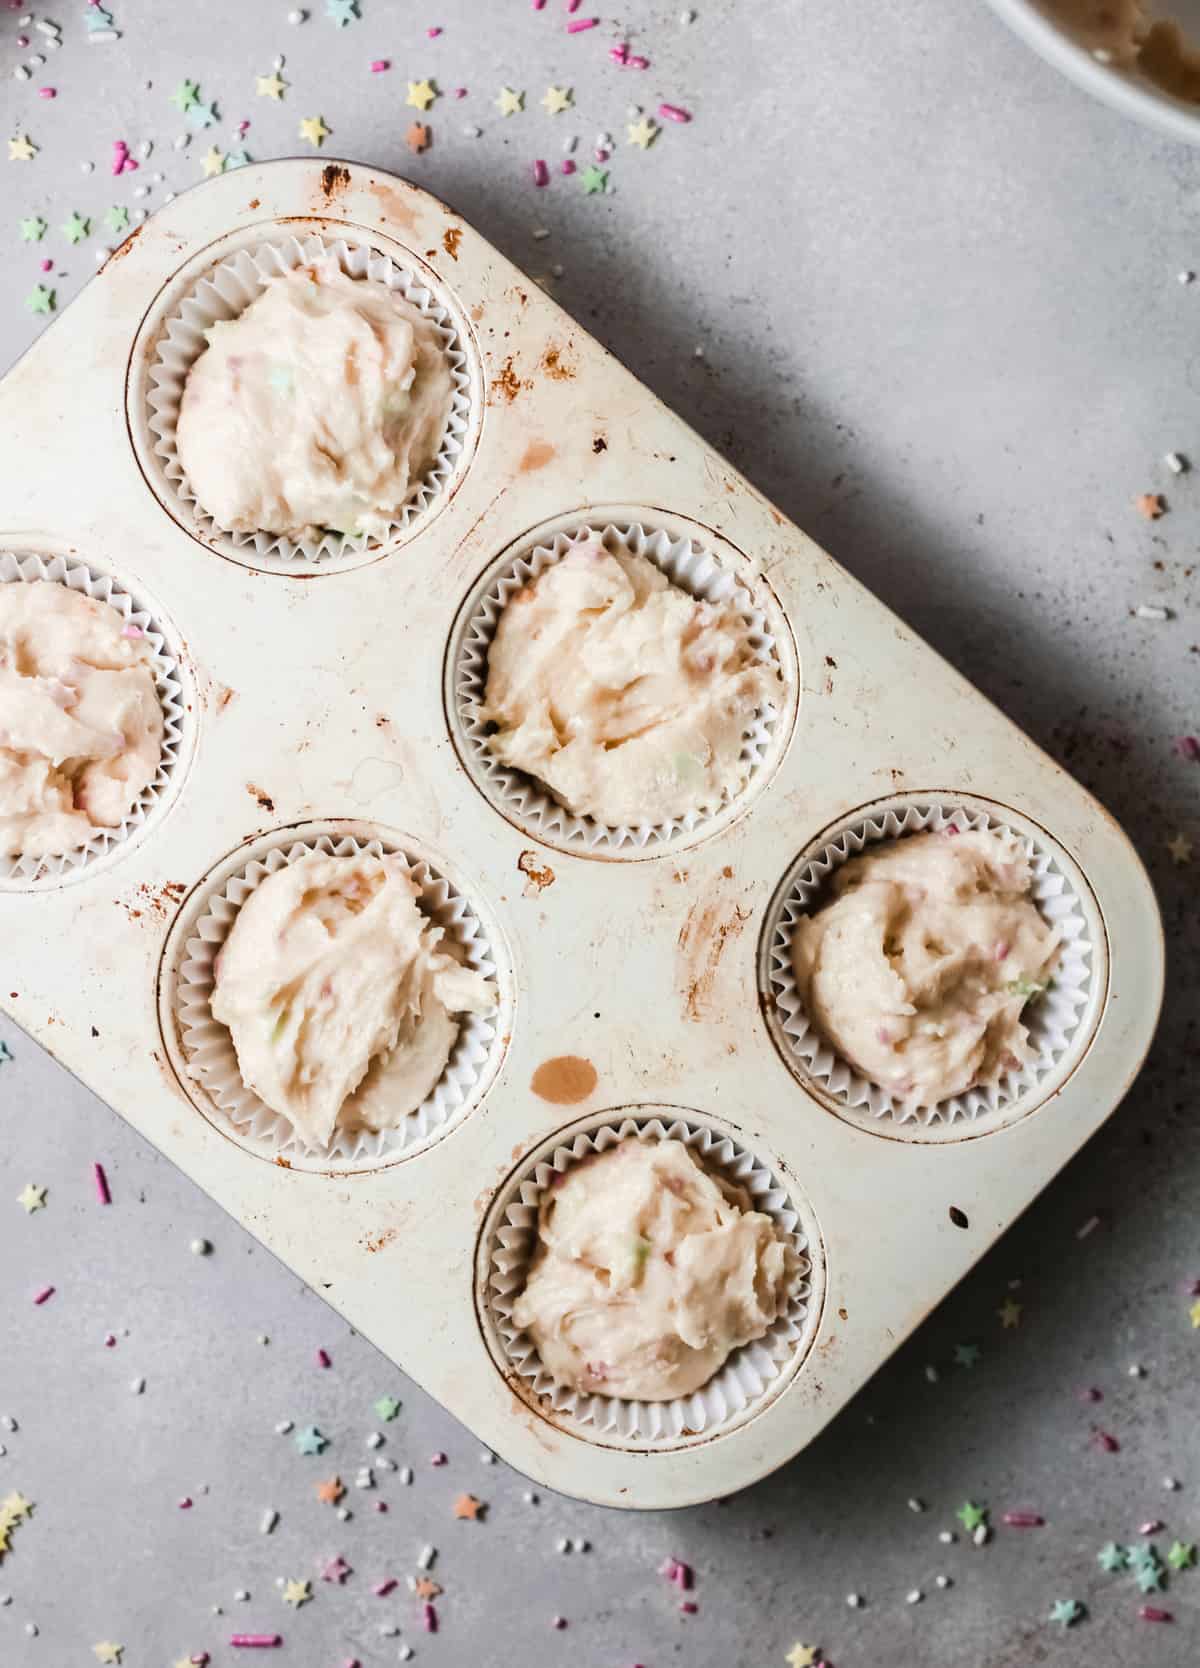 A 6-well muffin tin filled with paper liners and birthday cake batter with sprinkles ready for baking.